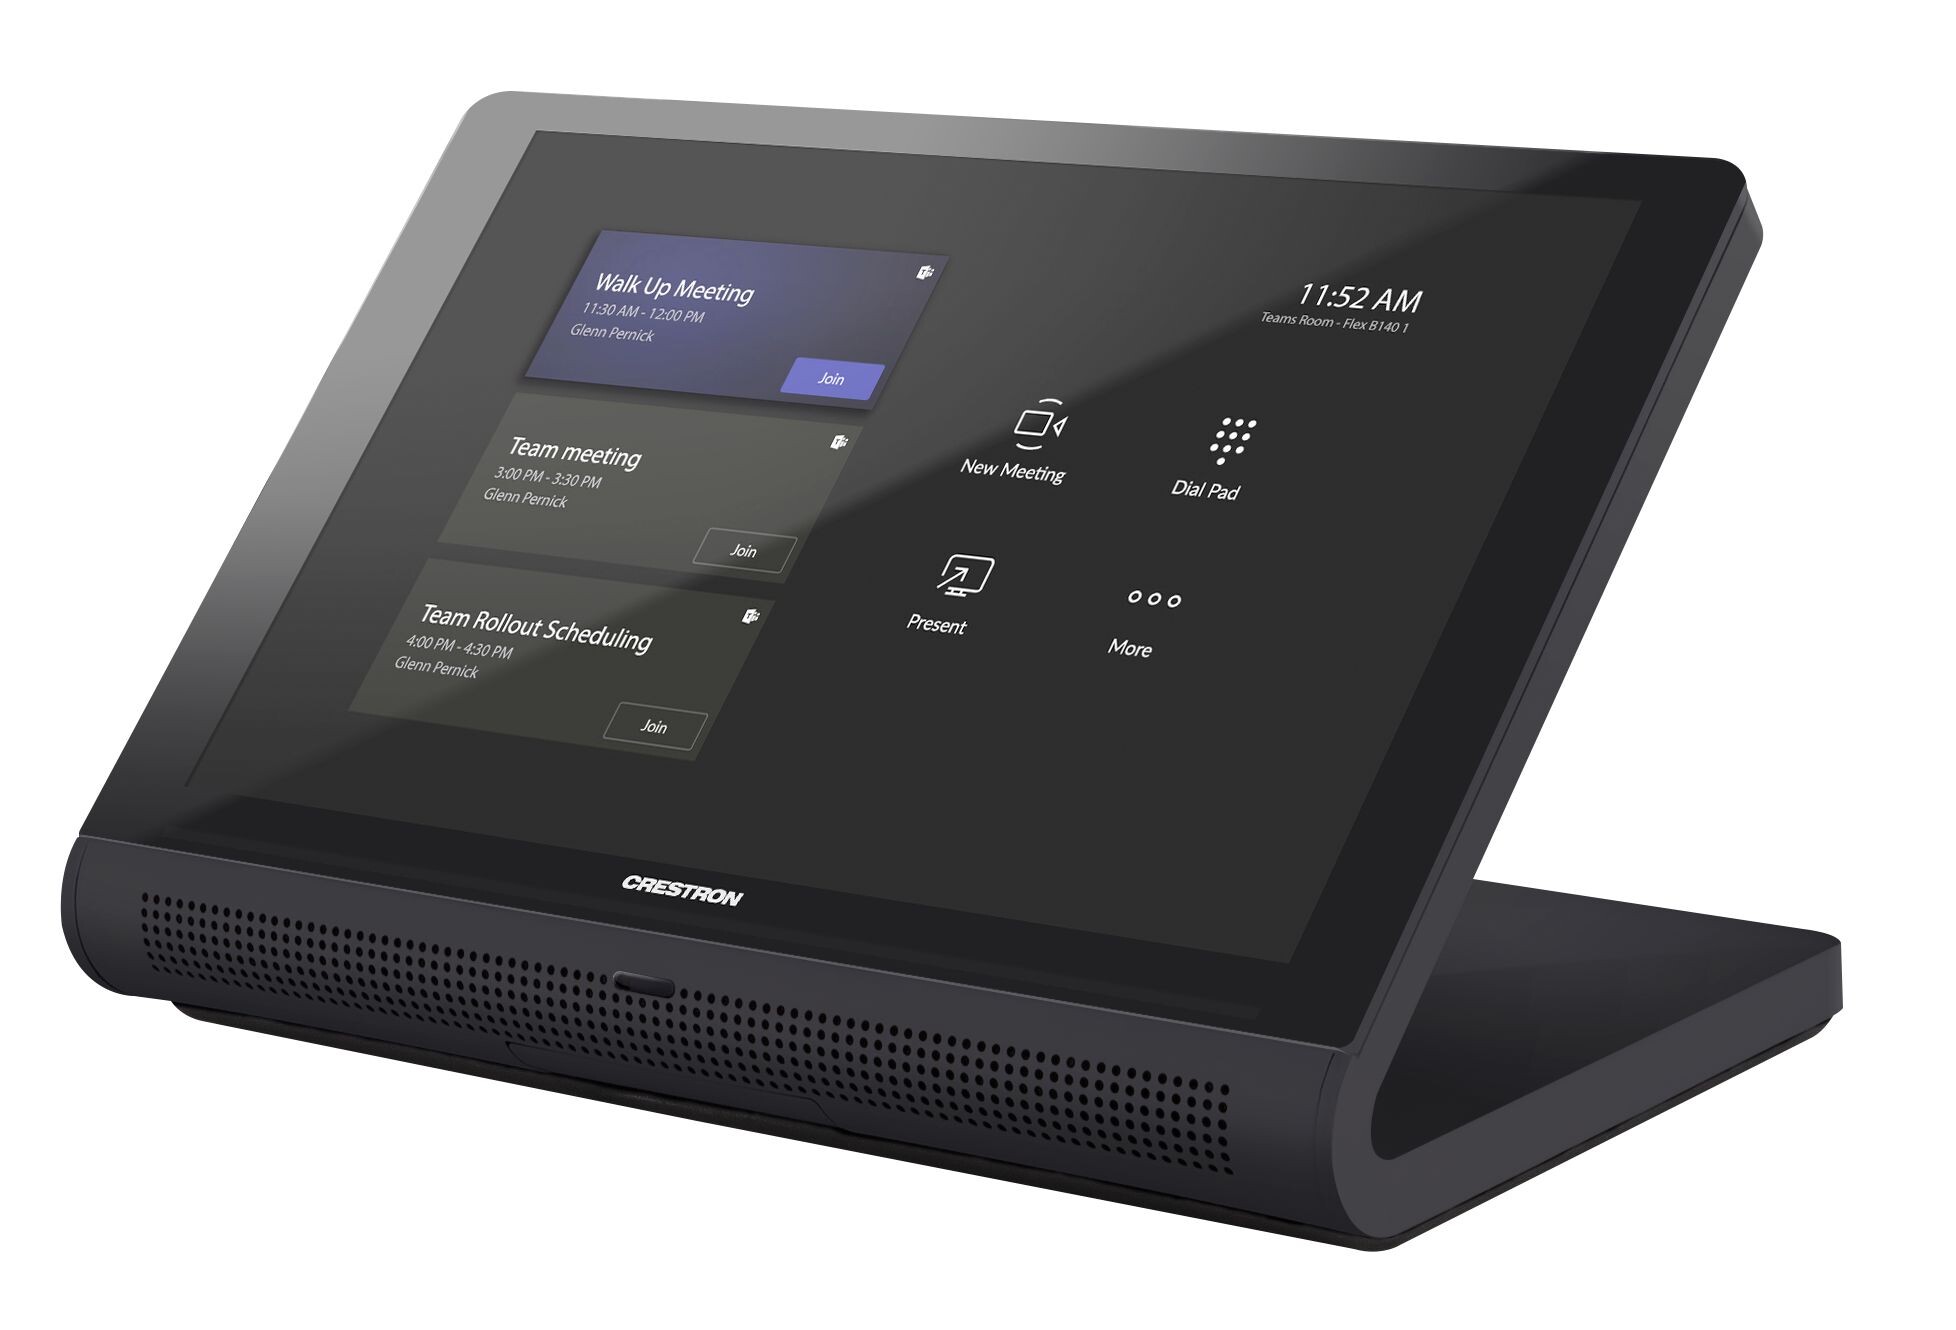 Crestron-TS-770-B-S-7-Tabletop-Touch-Screen-Black-Smooth